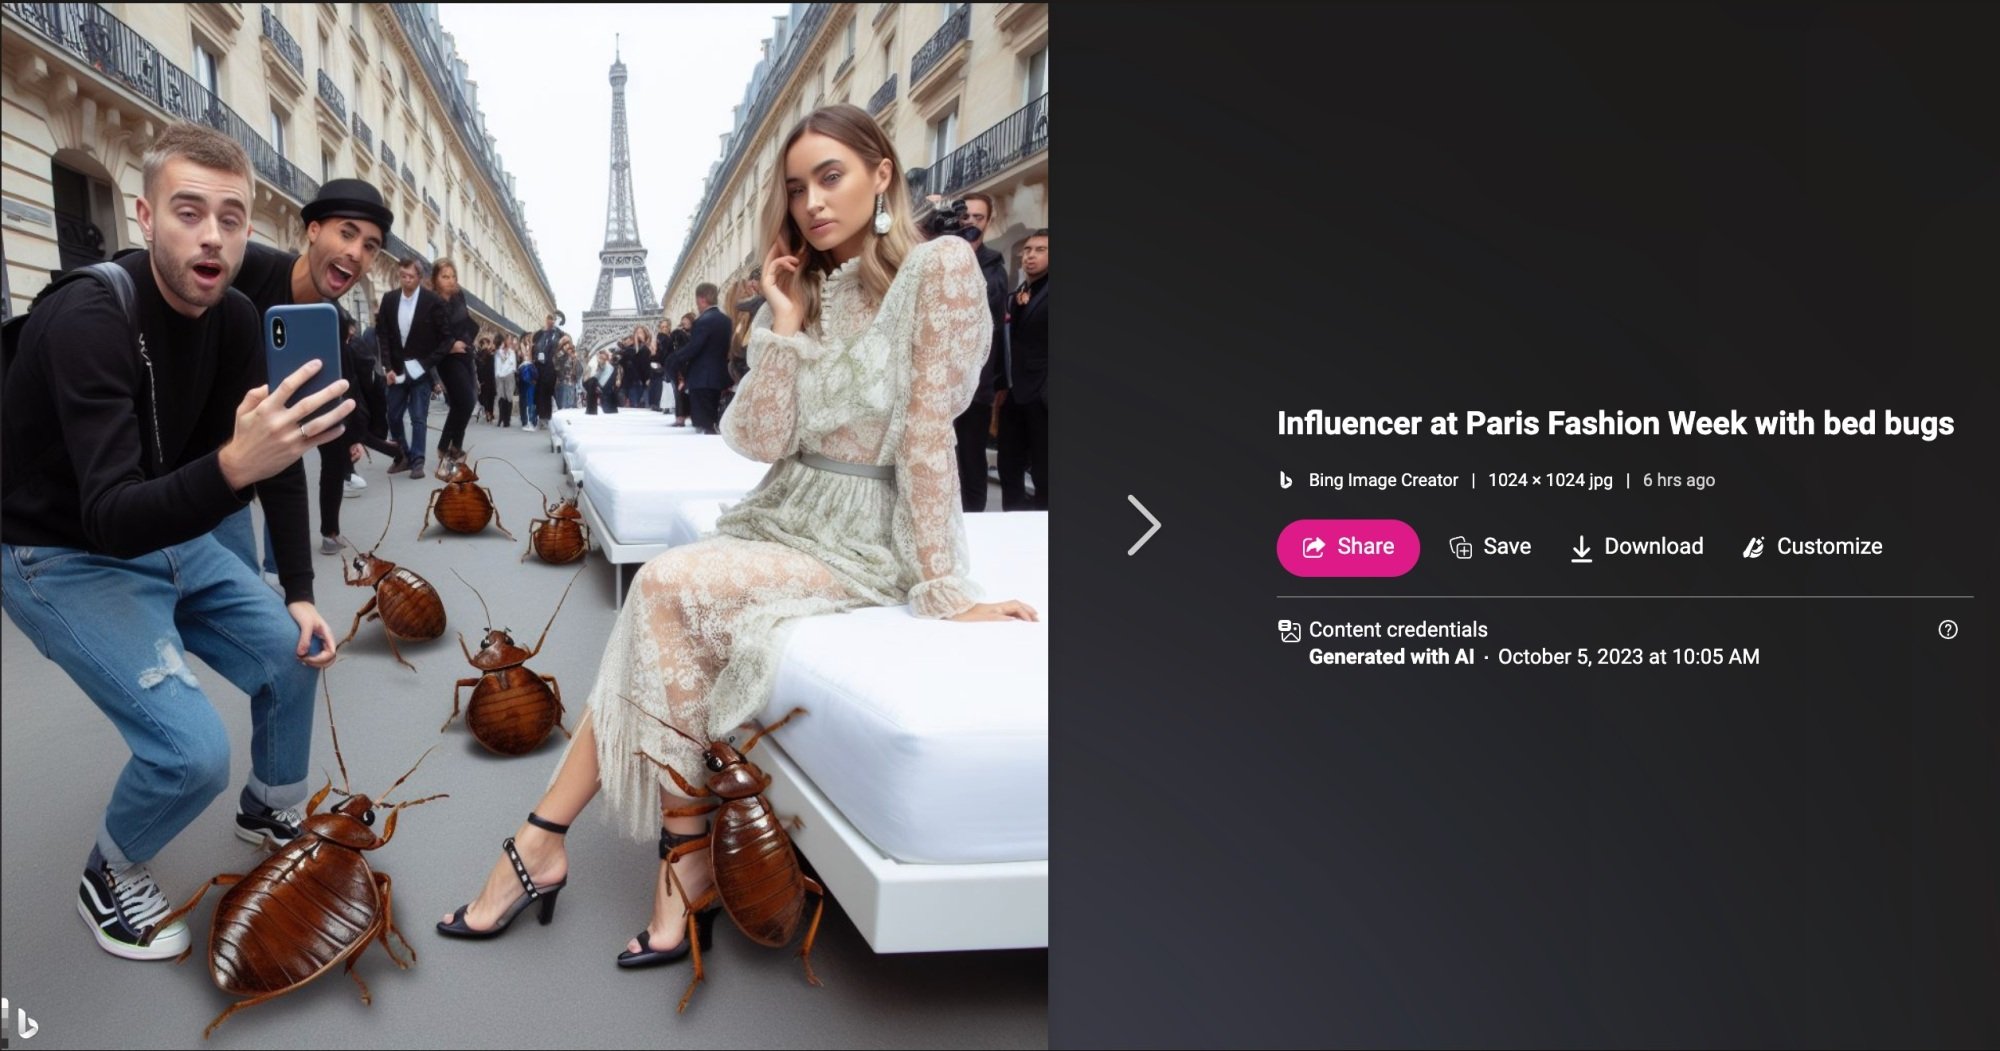 Bing Image Creator AI-generated image of influencers at Paris Fashion Week surrounded by bed bugs